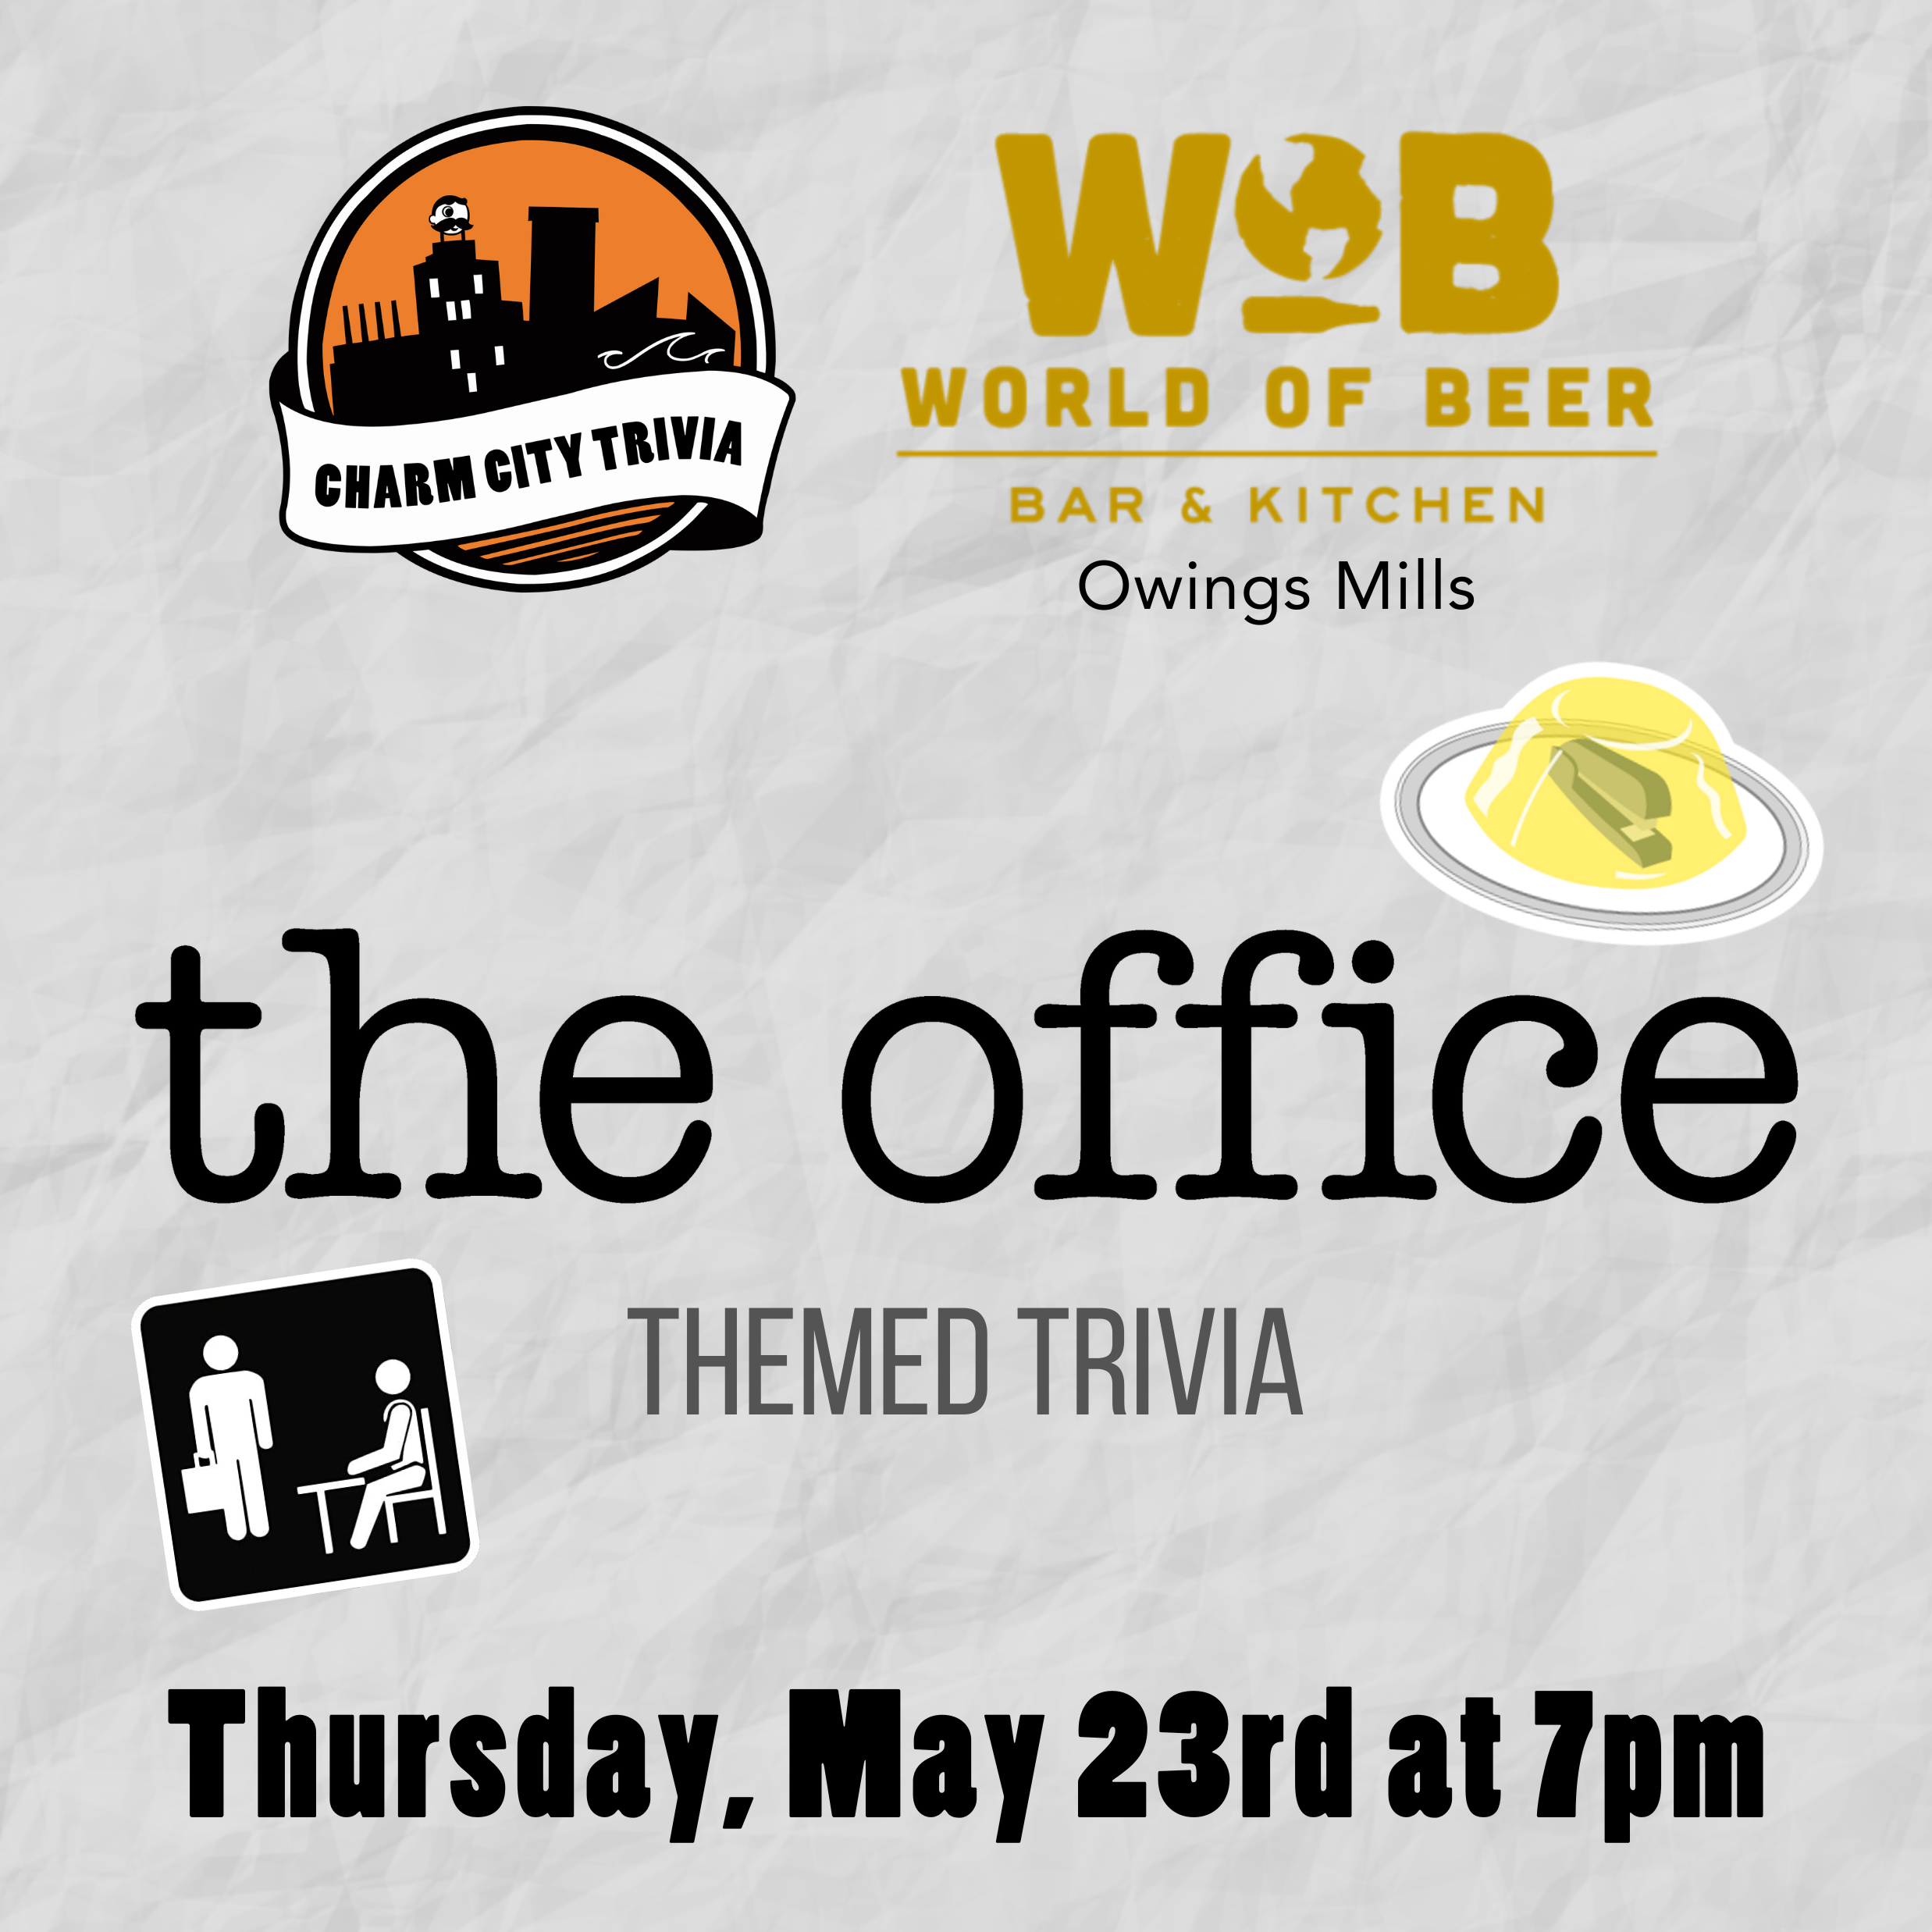 a light gray, paper textured background with the charm city trivia logo, world of beer owings mills logo, the office logo, a stapler in jello, the office placard, and black text. the text reads: thursday, may 23rd at 7pm